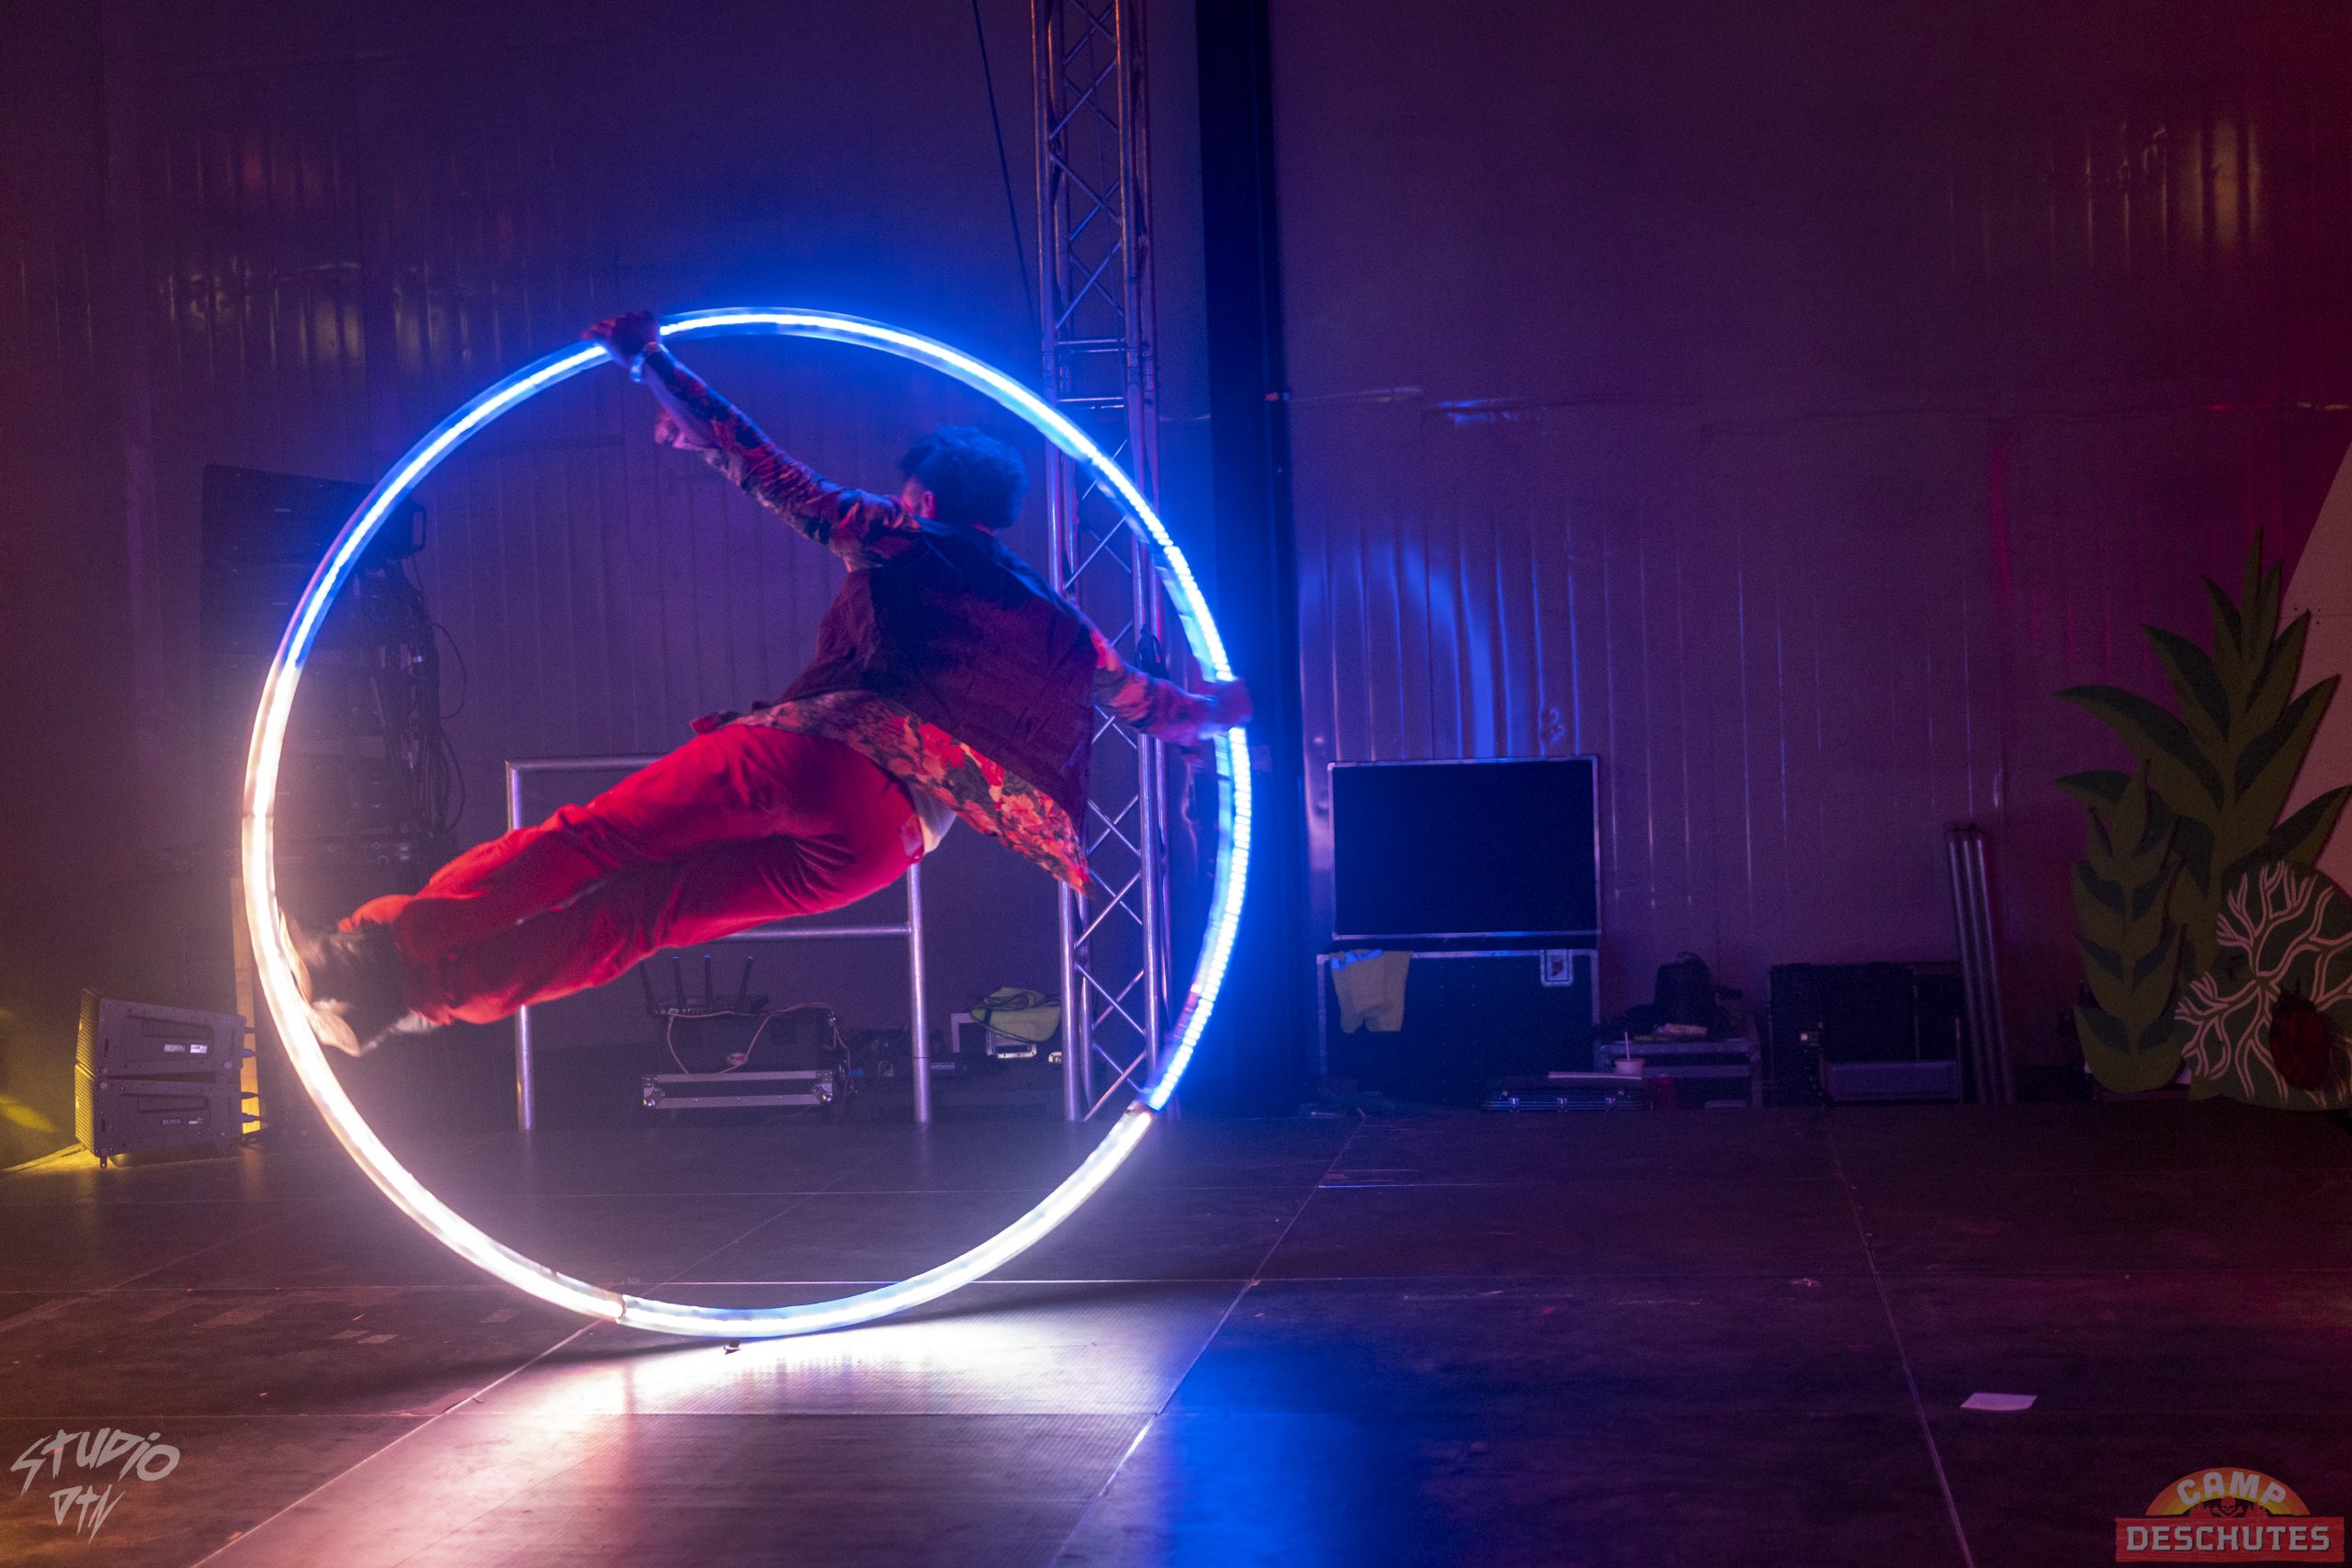 Circus performer on a Cyr (pronounced Seer) wheel) that lights up with LED's